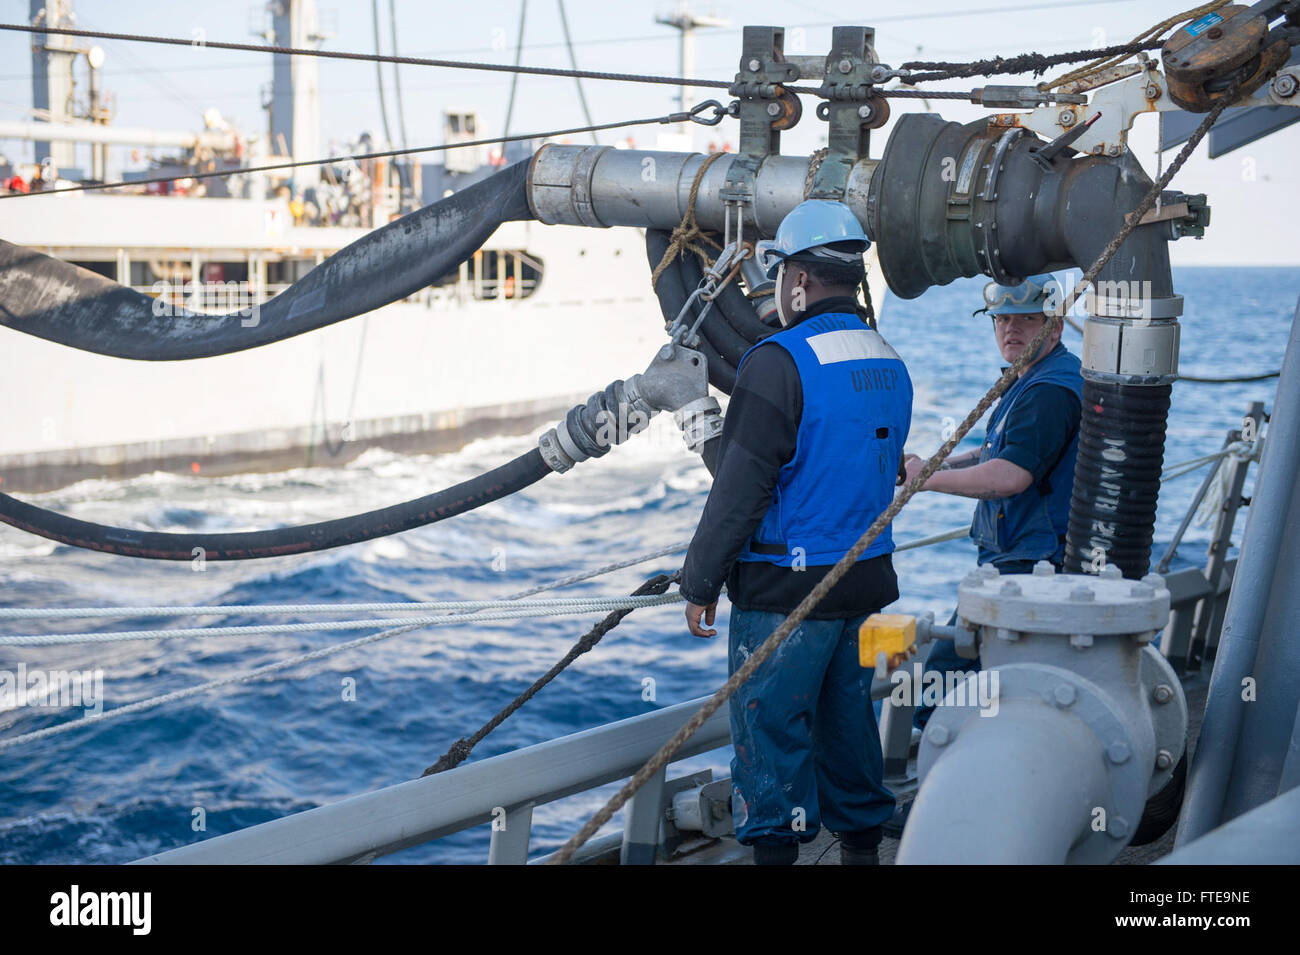 140208-N-UD469-139: MEDITERRANEAN SEA (Feb. 8, 2014) - Seaman Apprentice Aaron Laster, right, and Seaman Apprentice William Cruz monitor a fuel probe aboard the Arleigh Burke-class guided-missile destroyer USS Stout (DDG 55) during a replenishment-at-sea with the Military Sealift Command fleet replenishment oiler, USNS John Lenthall (T-AO 189). Stout, homeported in Norfolk, Va., is on a scheduled deployment supporting maritime security operations and theater security cooperation efforts in the U.S. 6th Fleet area of operations. (U.S. Navy photo by Mass Communication Specialist 2nd Class Amanda Stock Photo